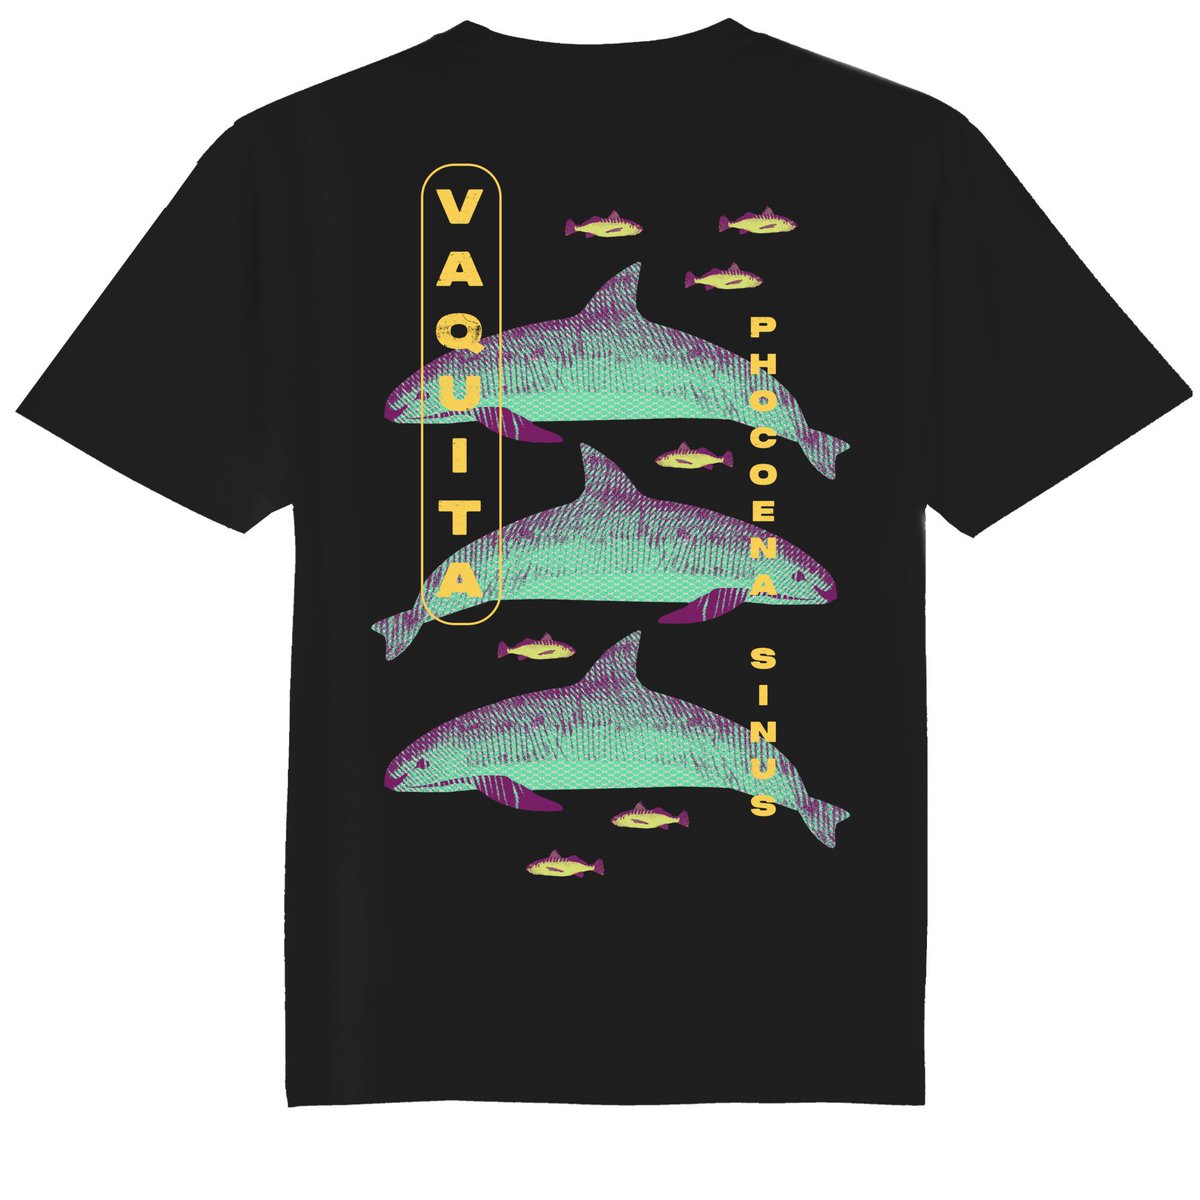 「My fish shirts are live! you can get one」|Hannaのイラスト